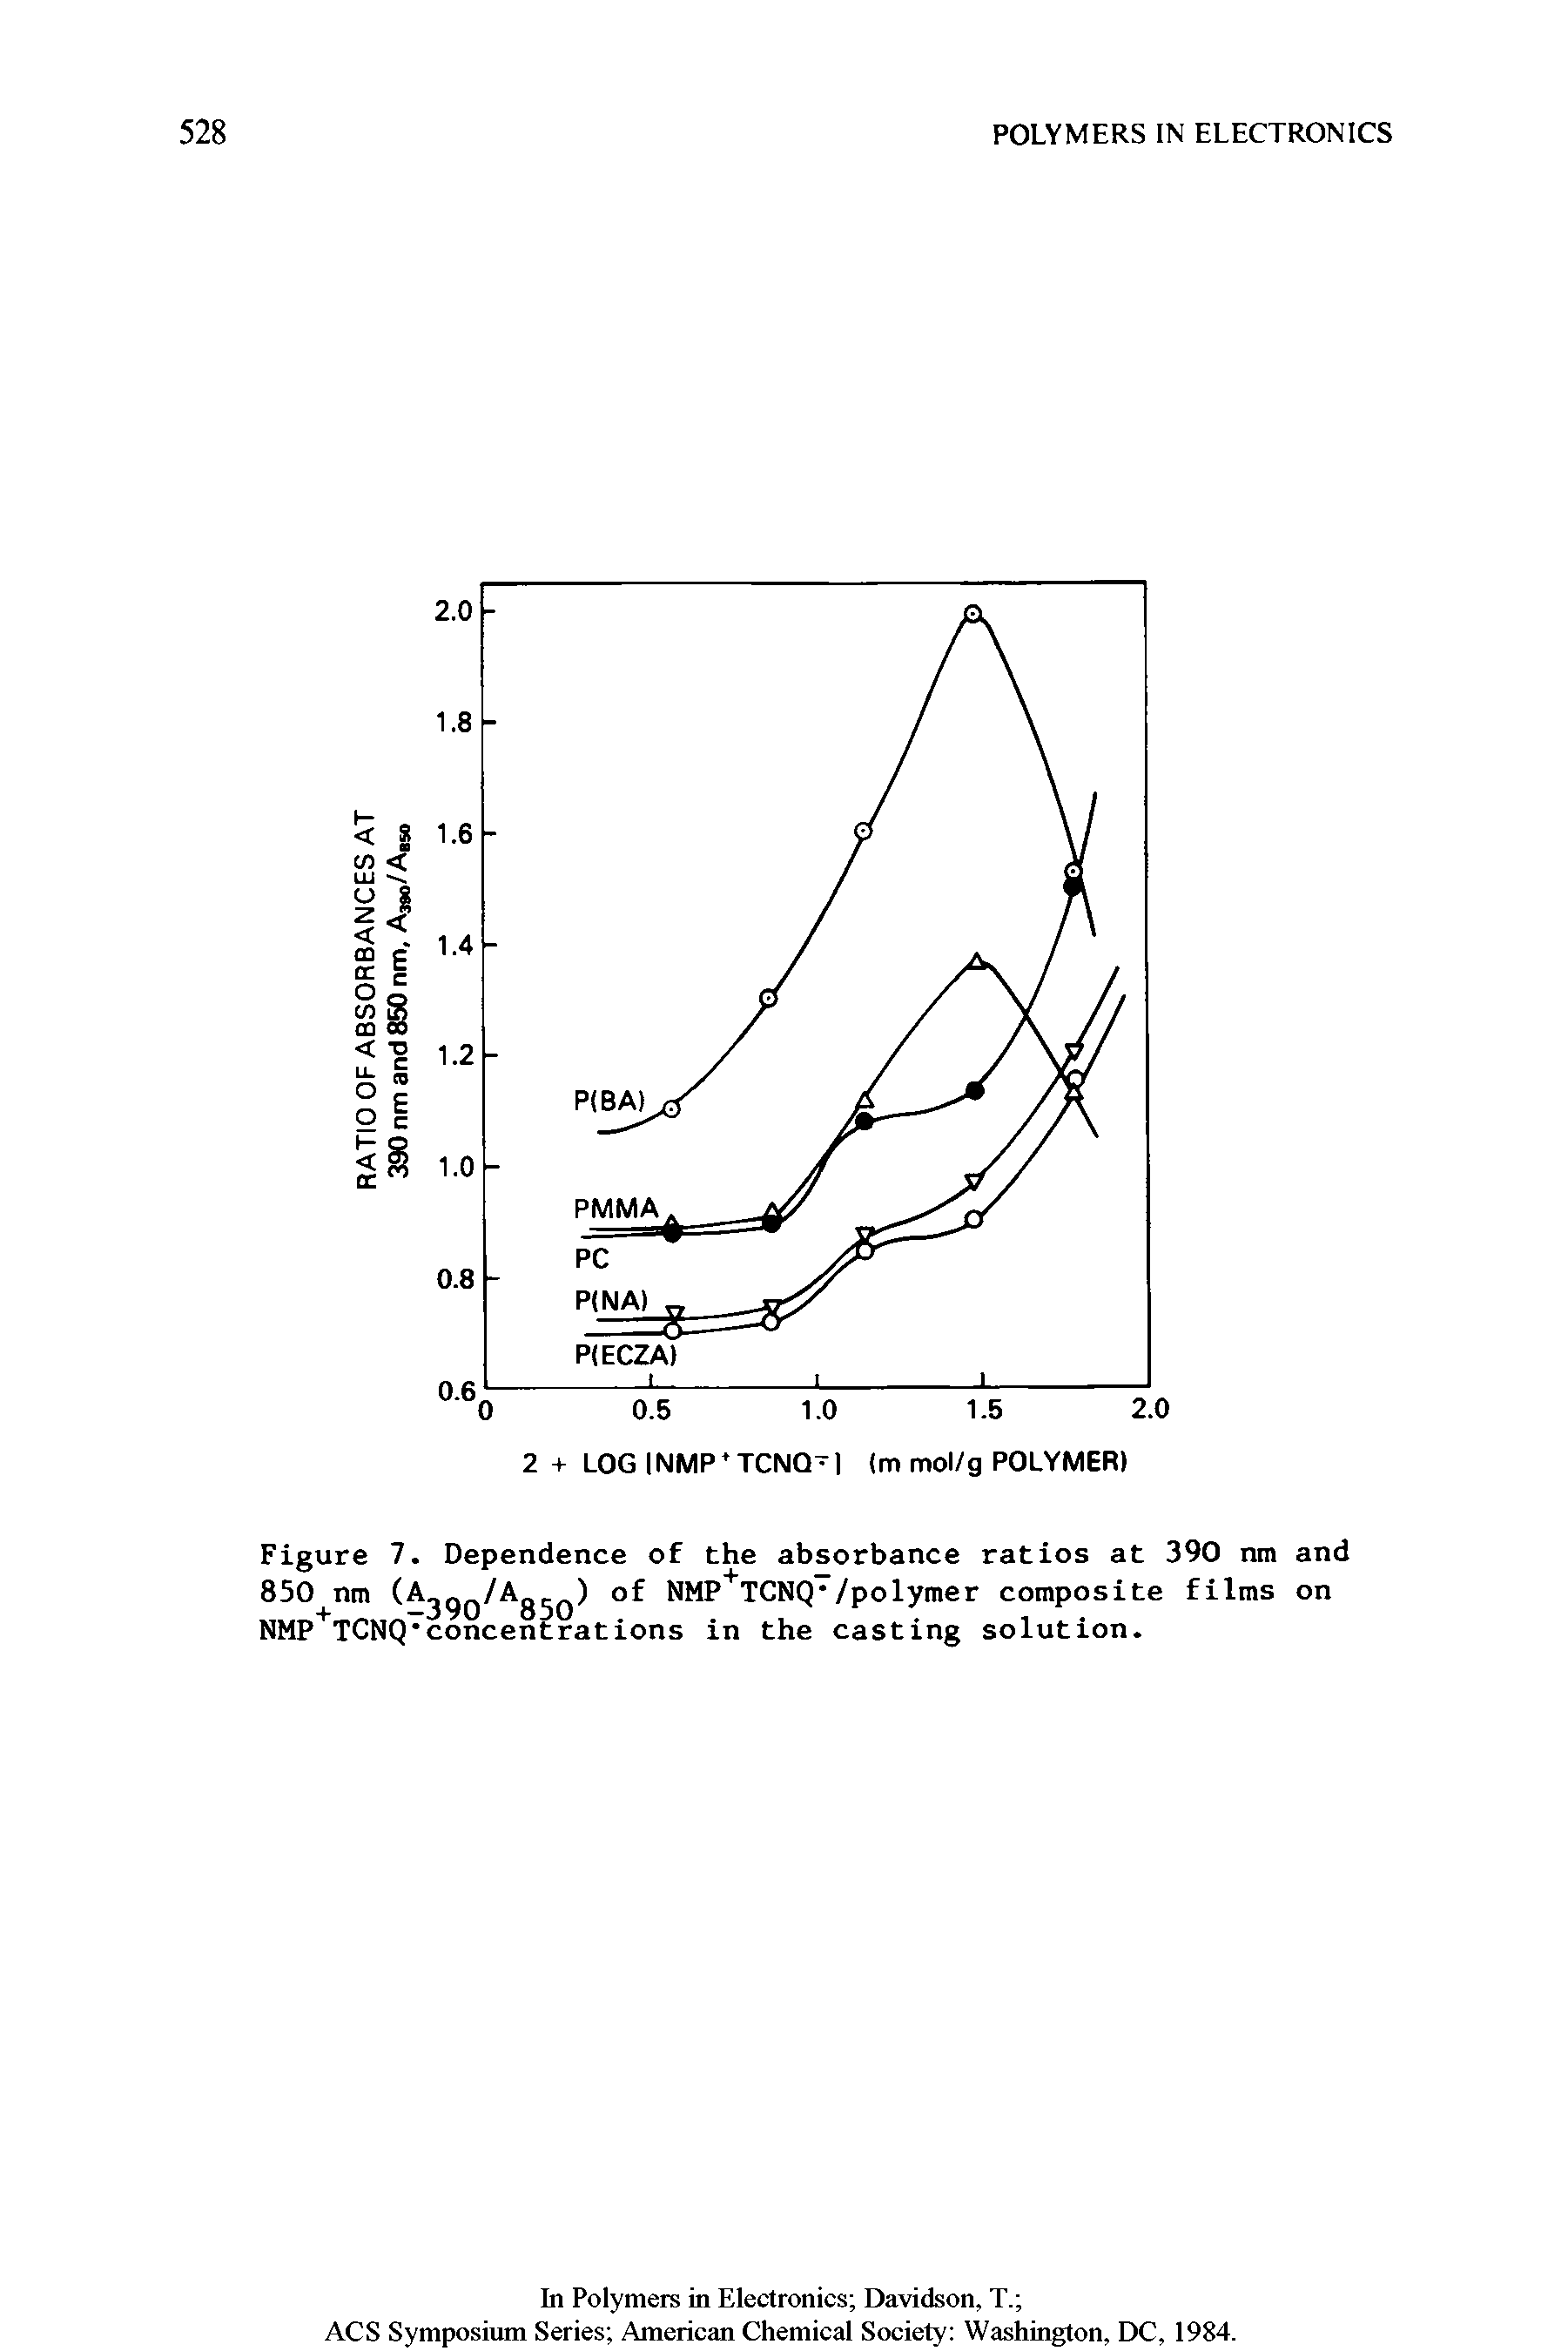 Figure 7. Dependence of the absorbance ratios at 390 nm and 850 nm (A /Ag ) NMP+TCNQ"/polymer composite films on NMP TCNQ concentrations in the casting solution.